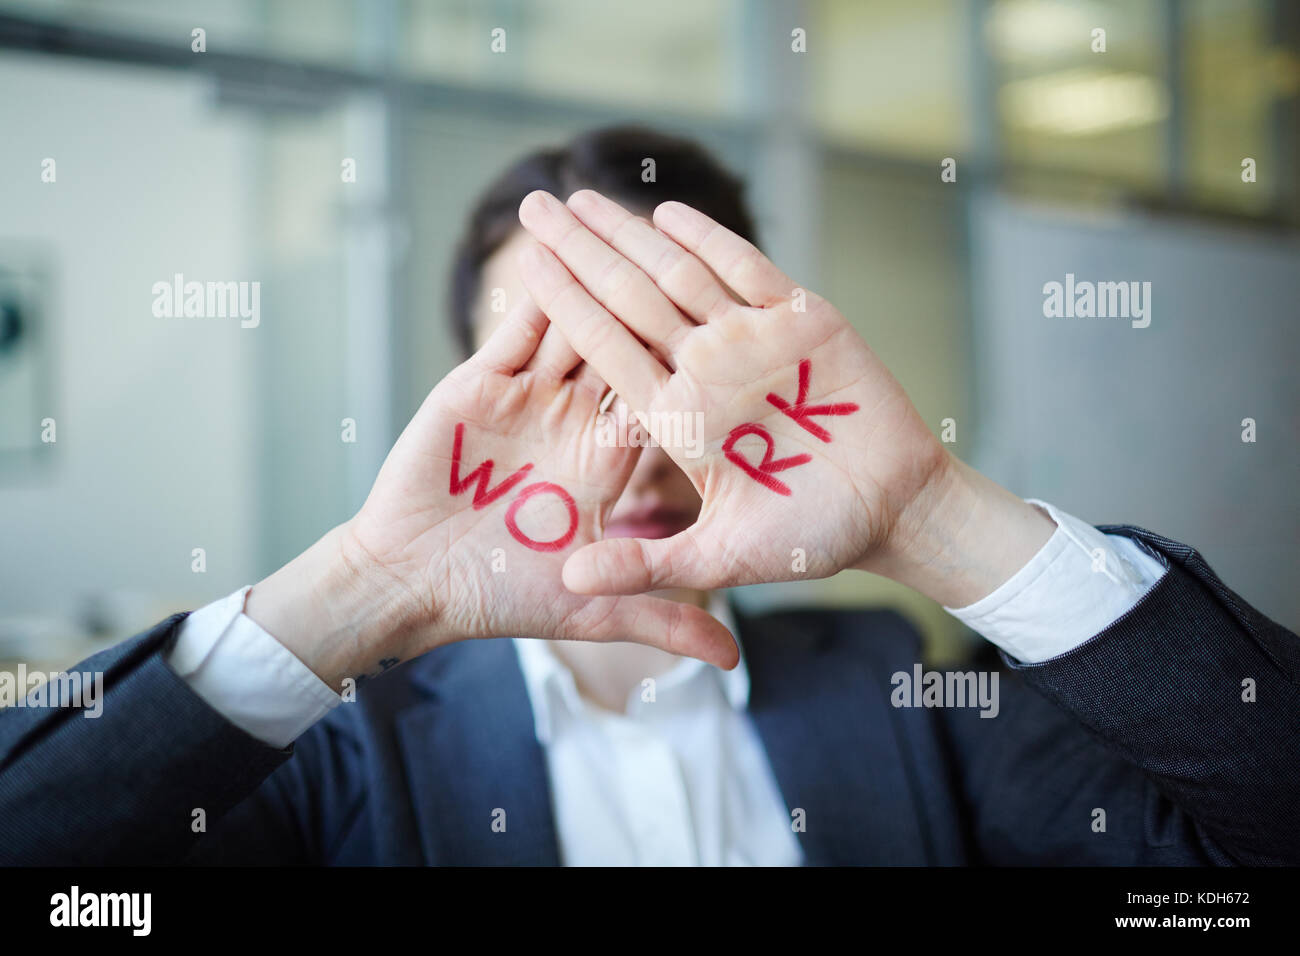 Businesswoman showing her palms with word work written by red lipstick Stock Photo